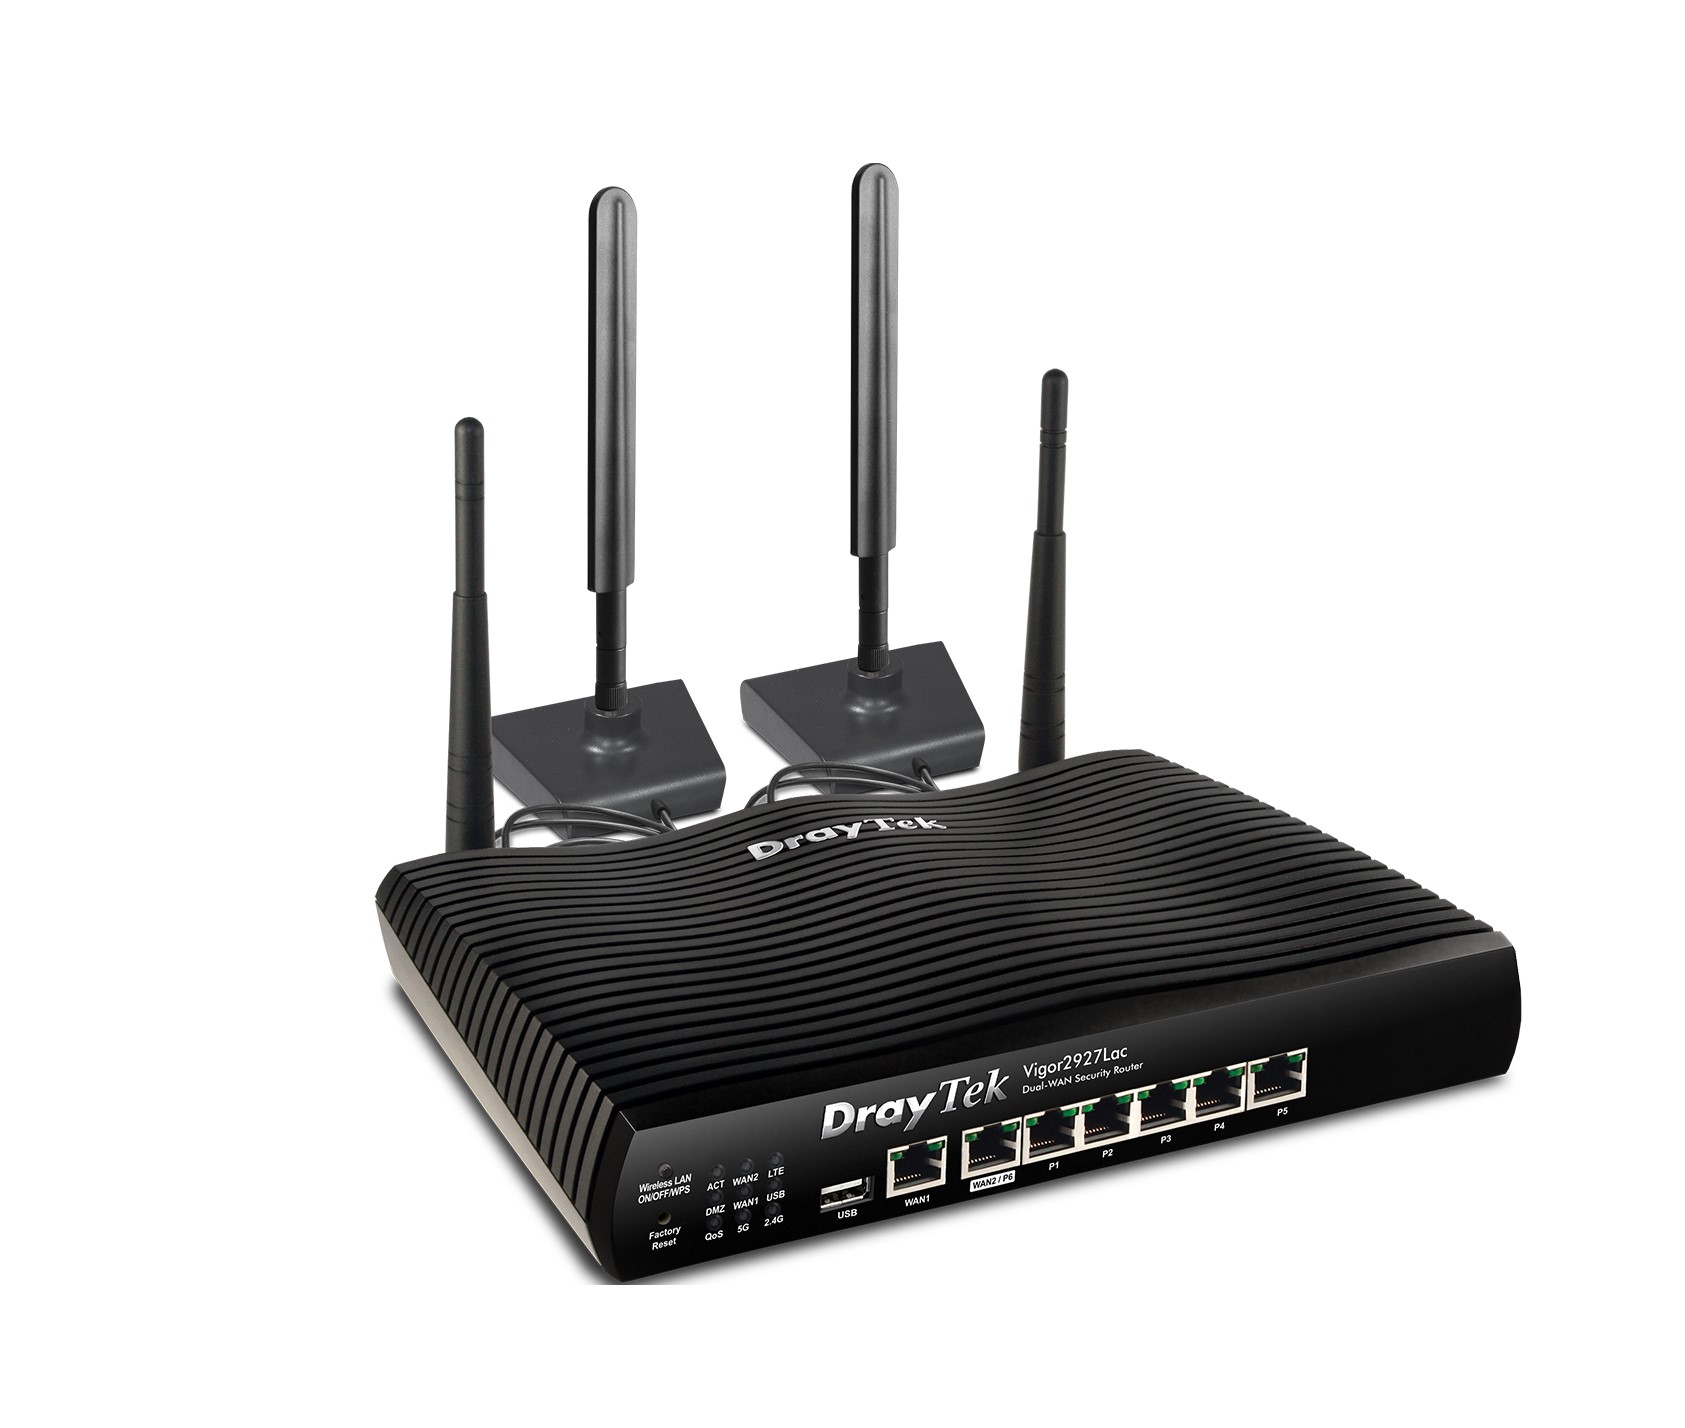  Multi WAN Router with a Cat6 4G LTE SIM slot, 1 x GbE WAN, 1 x GbE WAN/LAN, and 3G/4G USB WAN port for Load Balancing and Fail-over, 5 x GbE LANs, Object-based SPI Firewall, CSM, QoS, 802.11ac (AC1300) WiFi, 50 x VPNs, 25 x SSL VPNs, and support VigorACS 2  